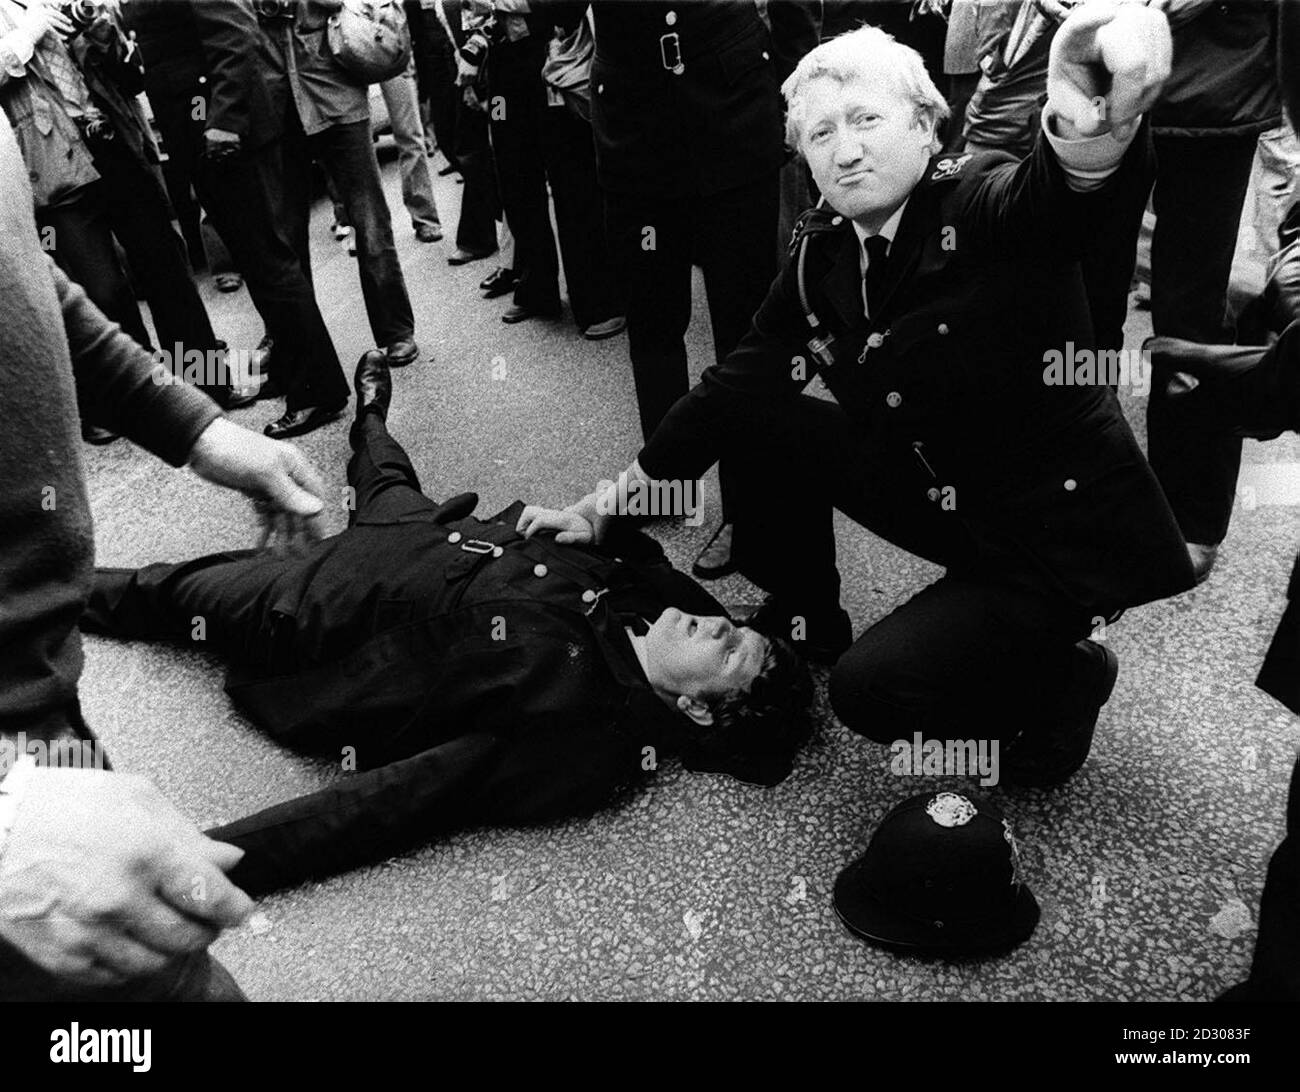 A young police officer, bleeding heavily from a head wound, is tended by a colleague after being hit on the head by a bottle outside the beseiged Grunwick film processing plant in North London, during a clash between police and pickets.   * The clashes were sparked off by the arrest of Yorkshire miners' leader Arthur Scargill. Stock Photo